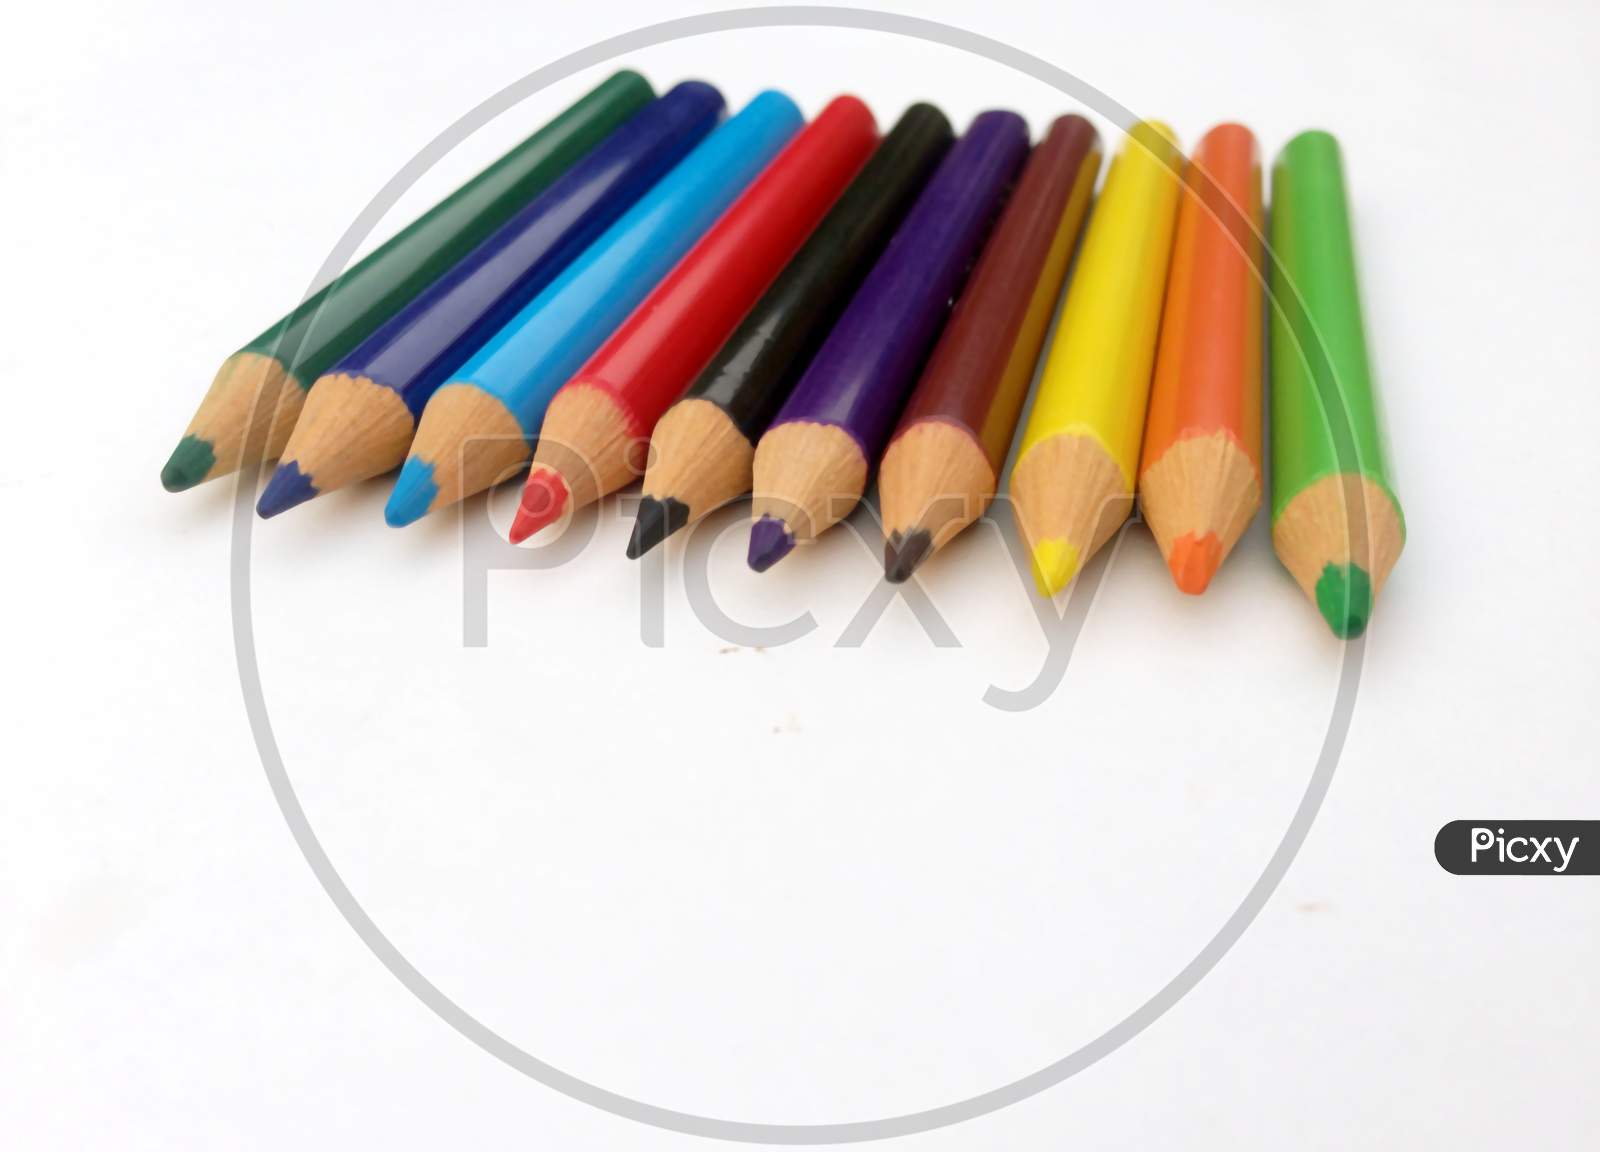 multi colored pencil isolated on white background